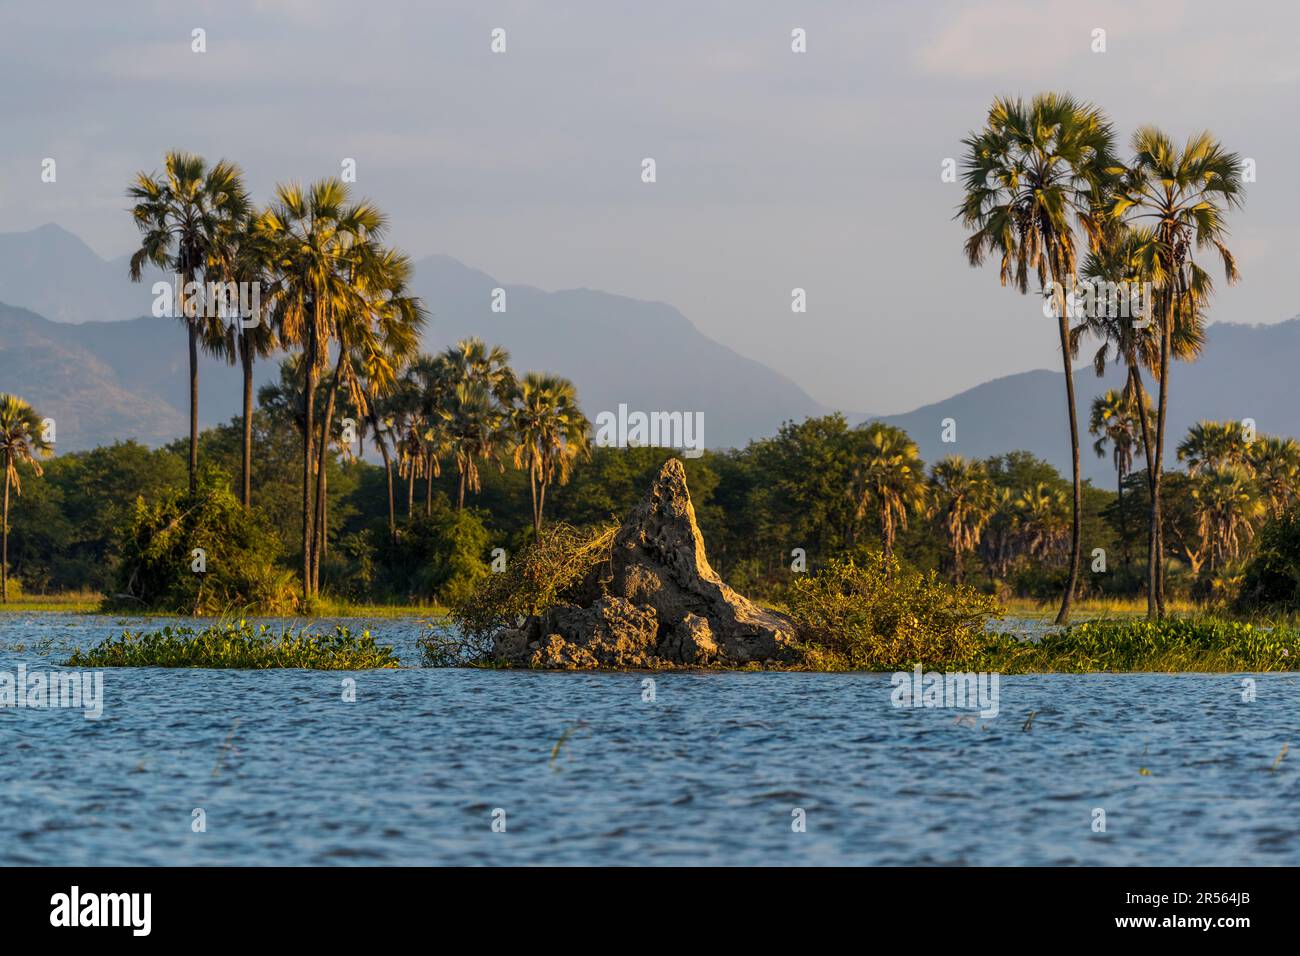 Evening atmosphere on the Shire River. Liwonde National Park, Malawi. Palm trees in the flood plain on the banks of the Shire River and the Shire Highlands in the background create a very beautiful landscape Stock Photo